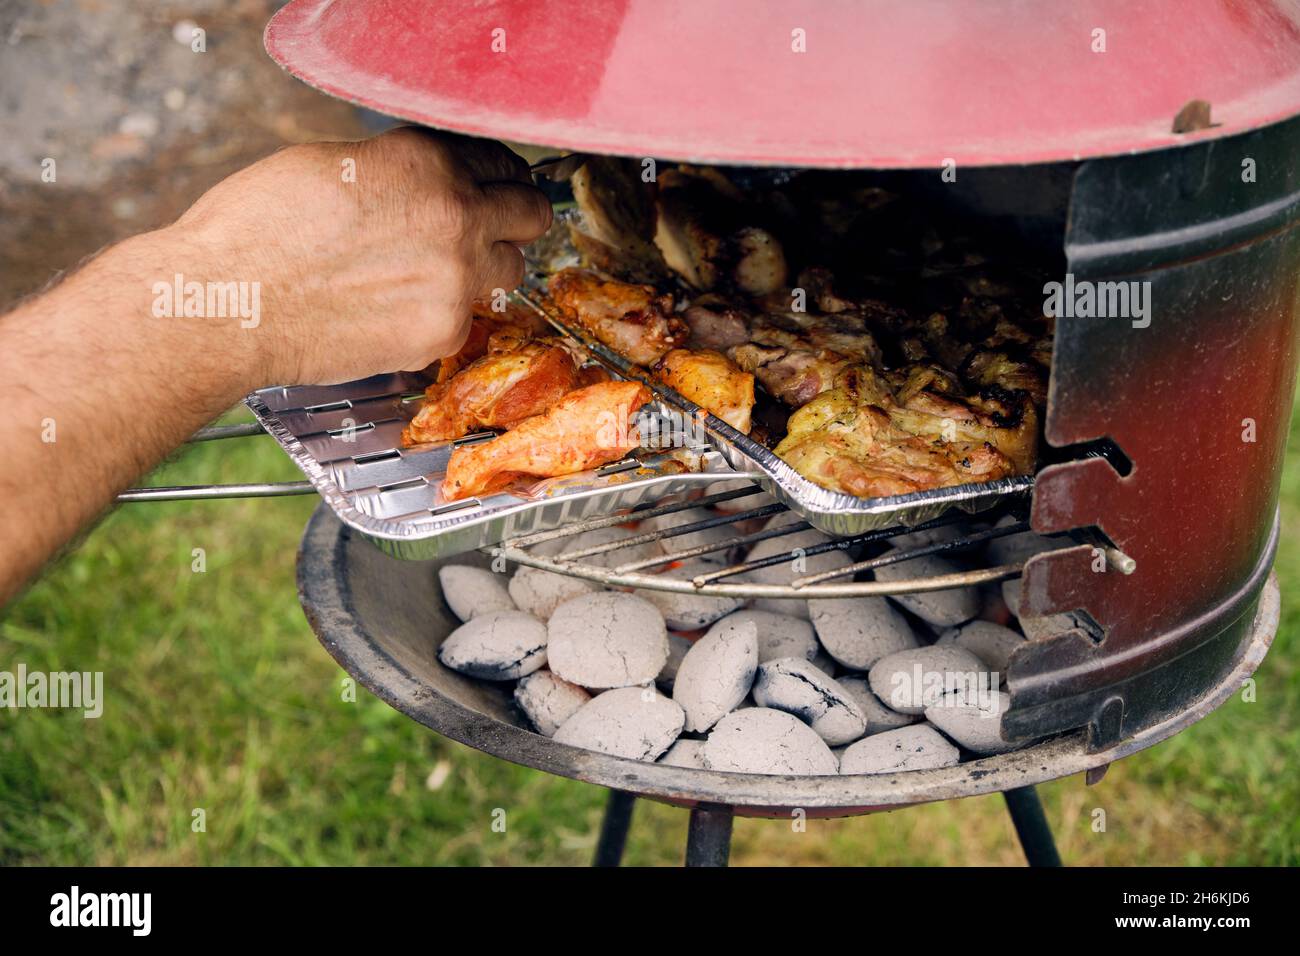 close-up of an elderly man's hand turning meat on the grill Stock Photo